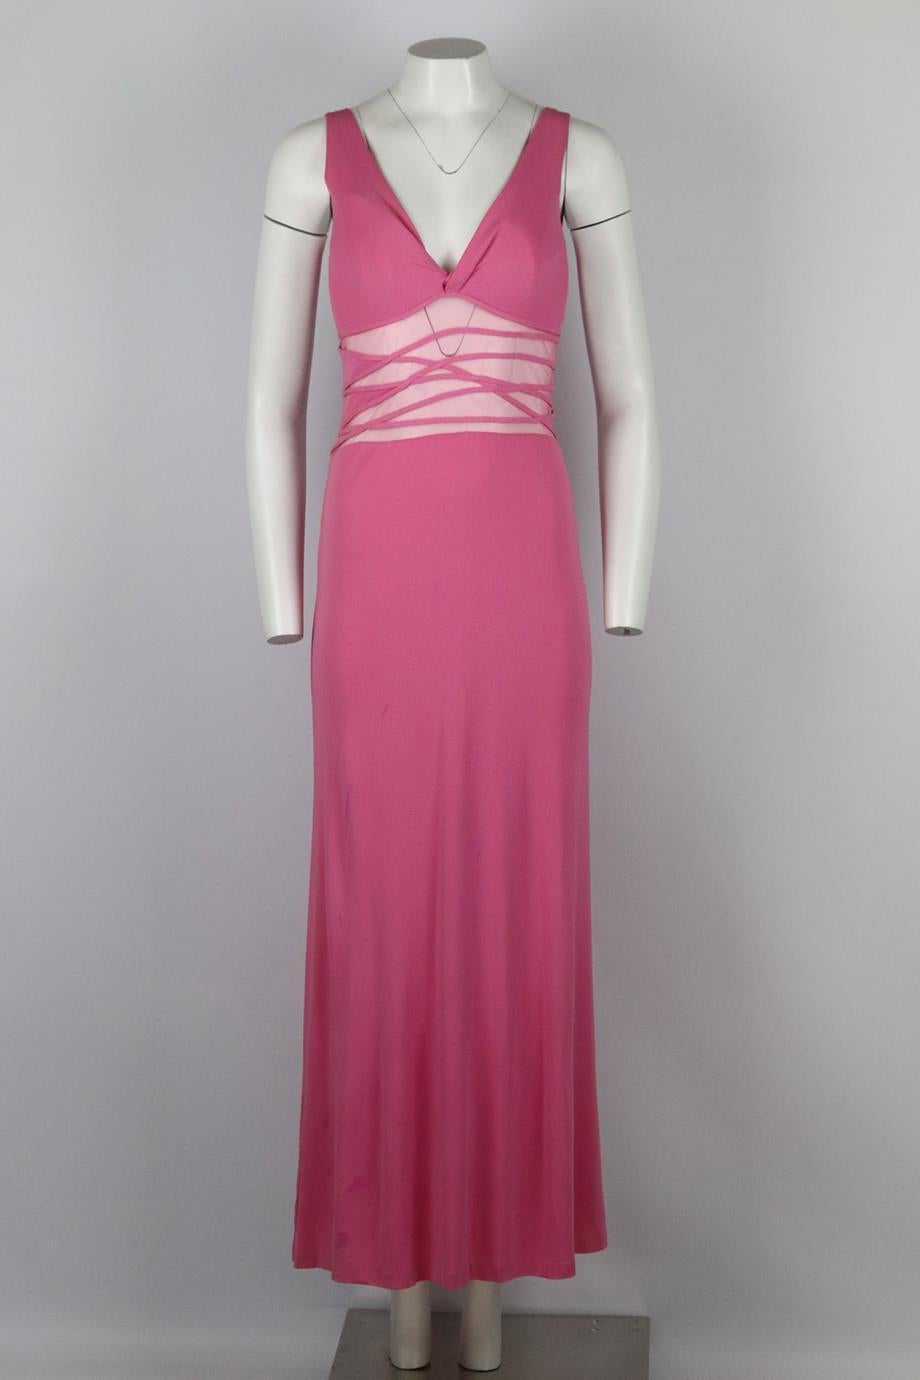 La Perla vintage mesh paneled jersey maxi dress. Pink. Sleeveless, v-neck. Zip fastening at side. 80% Acetate, 20% nylon. Size: IT 44 (UK 12, US 8, FR 40). Bust: 31.8 in. Waist: 27 in. Hips: 42 in. Length: 58 in. Good condition - Some signs of wear;